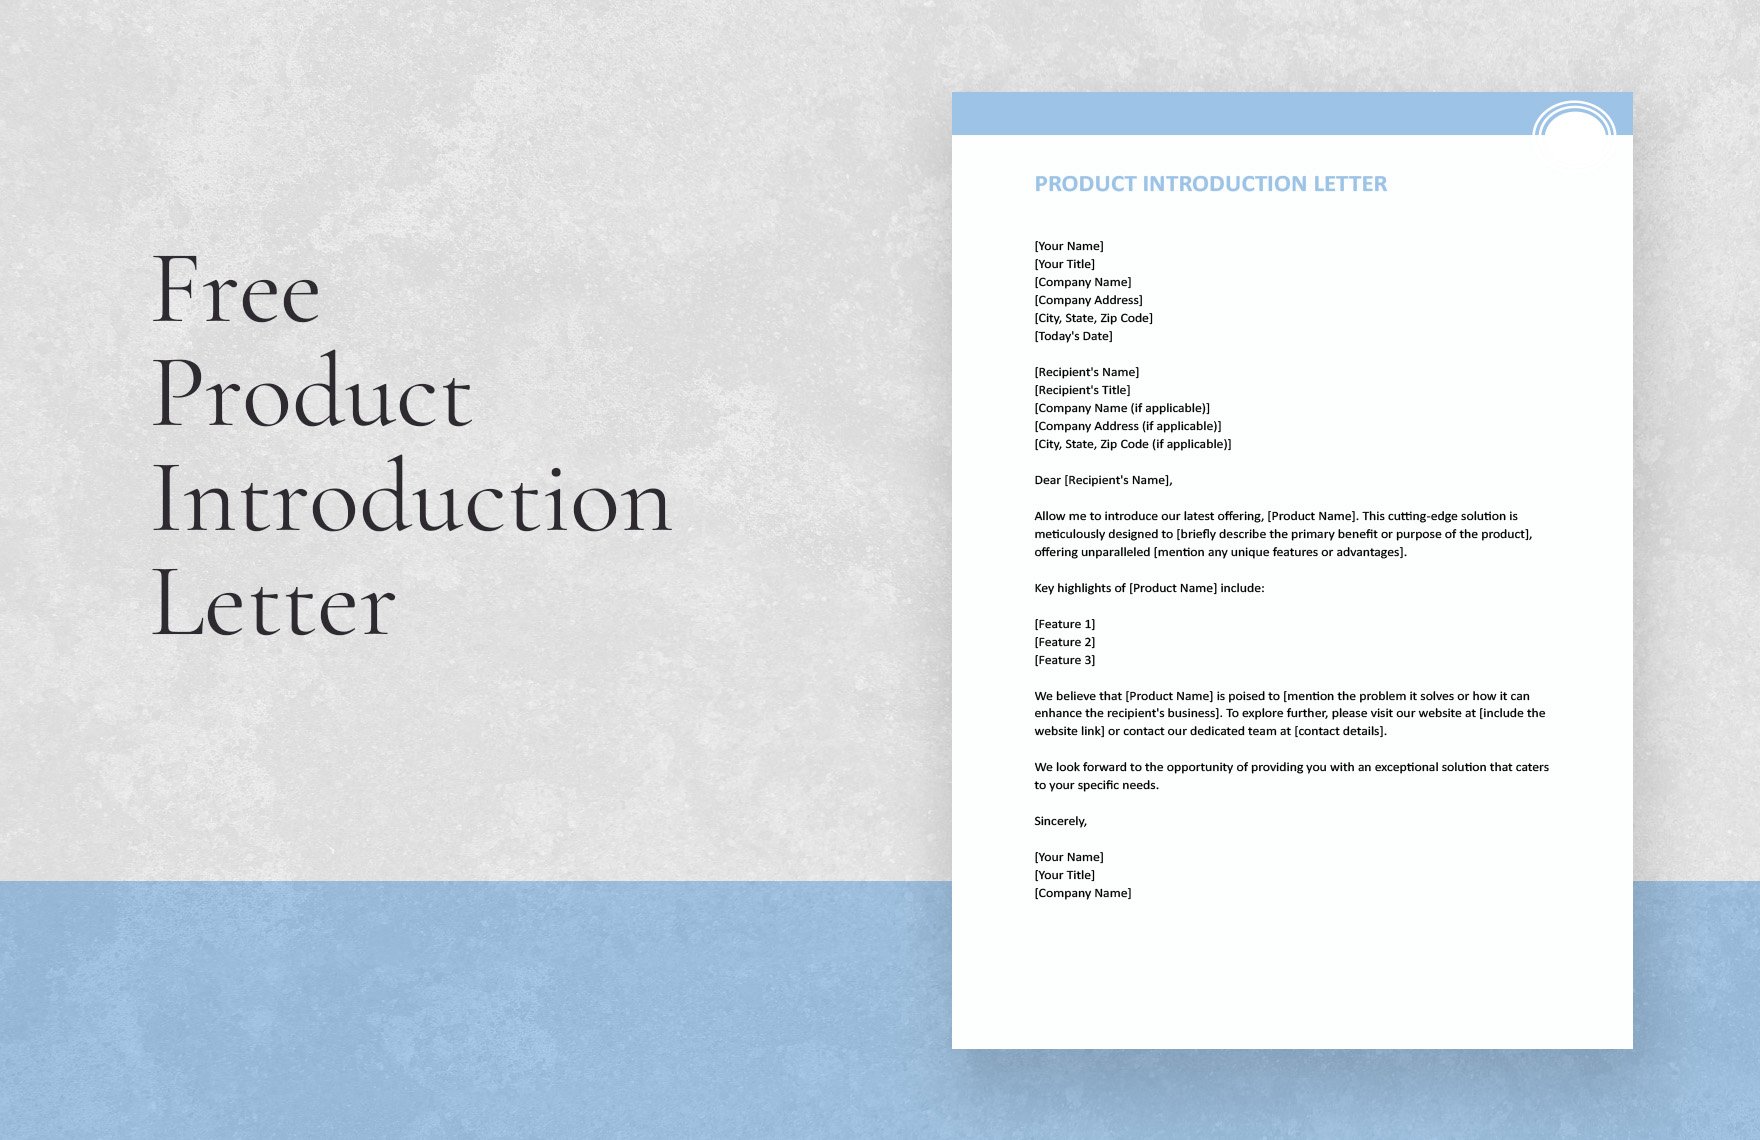 Free Product Introduction Letter